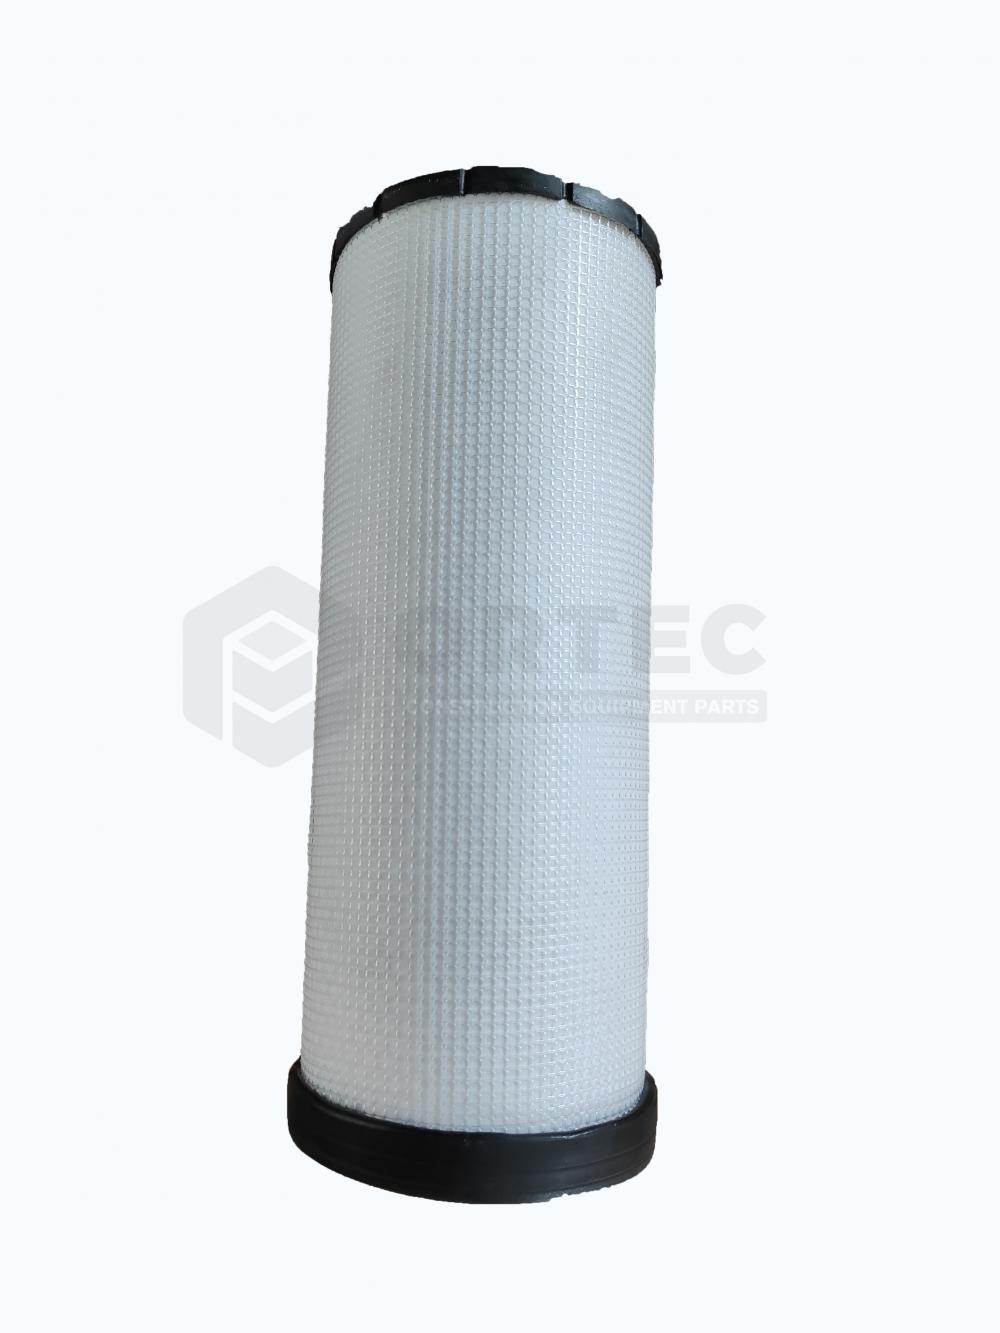 Air filter 4110002111 suitable for LGMG MT86